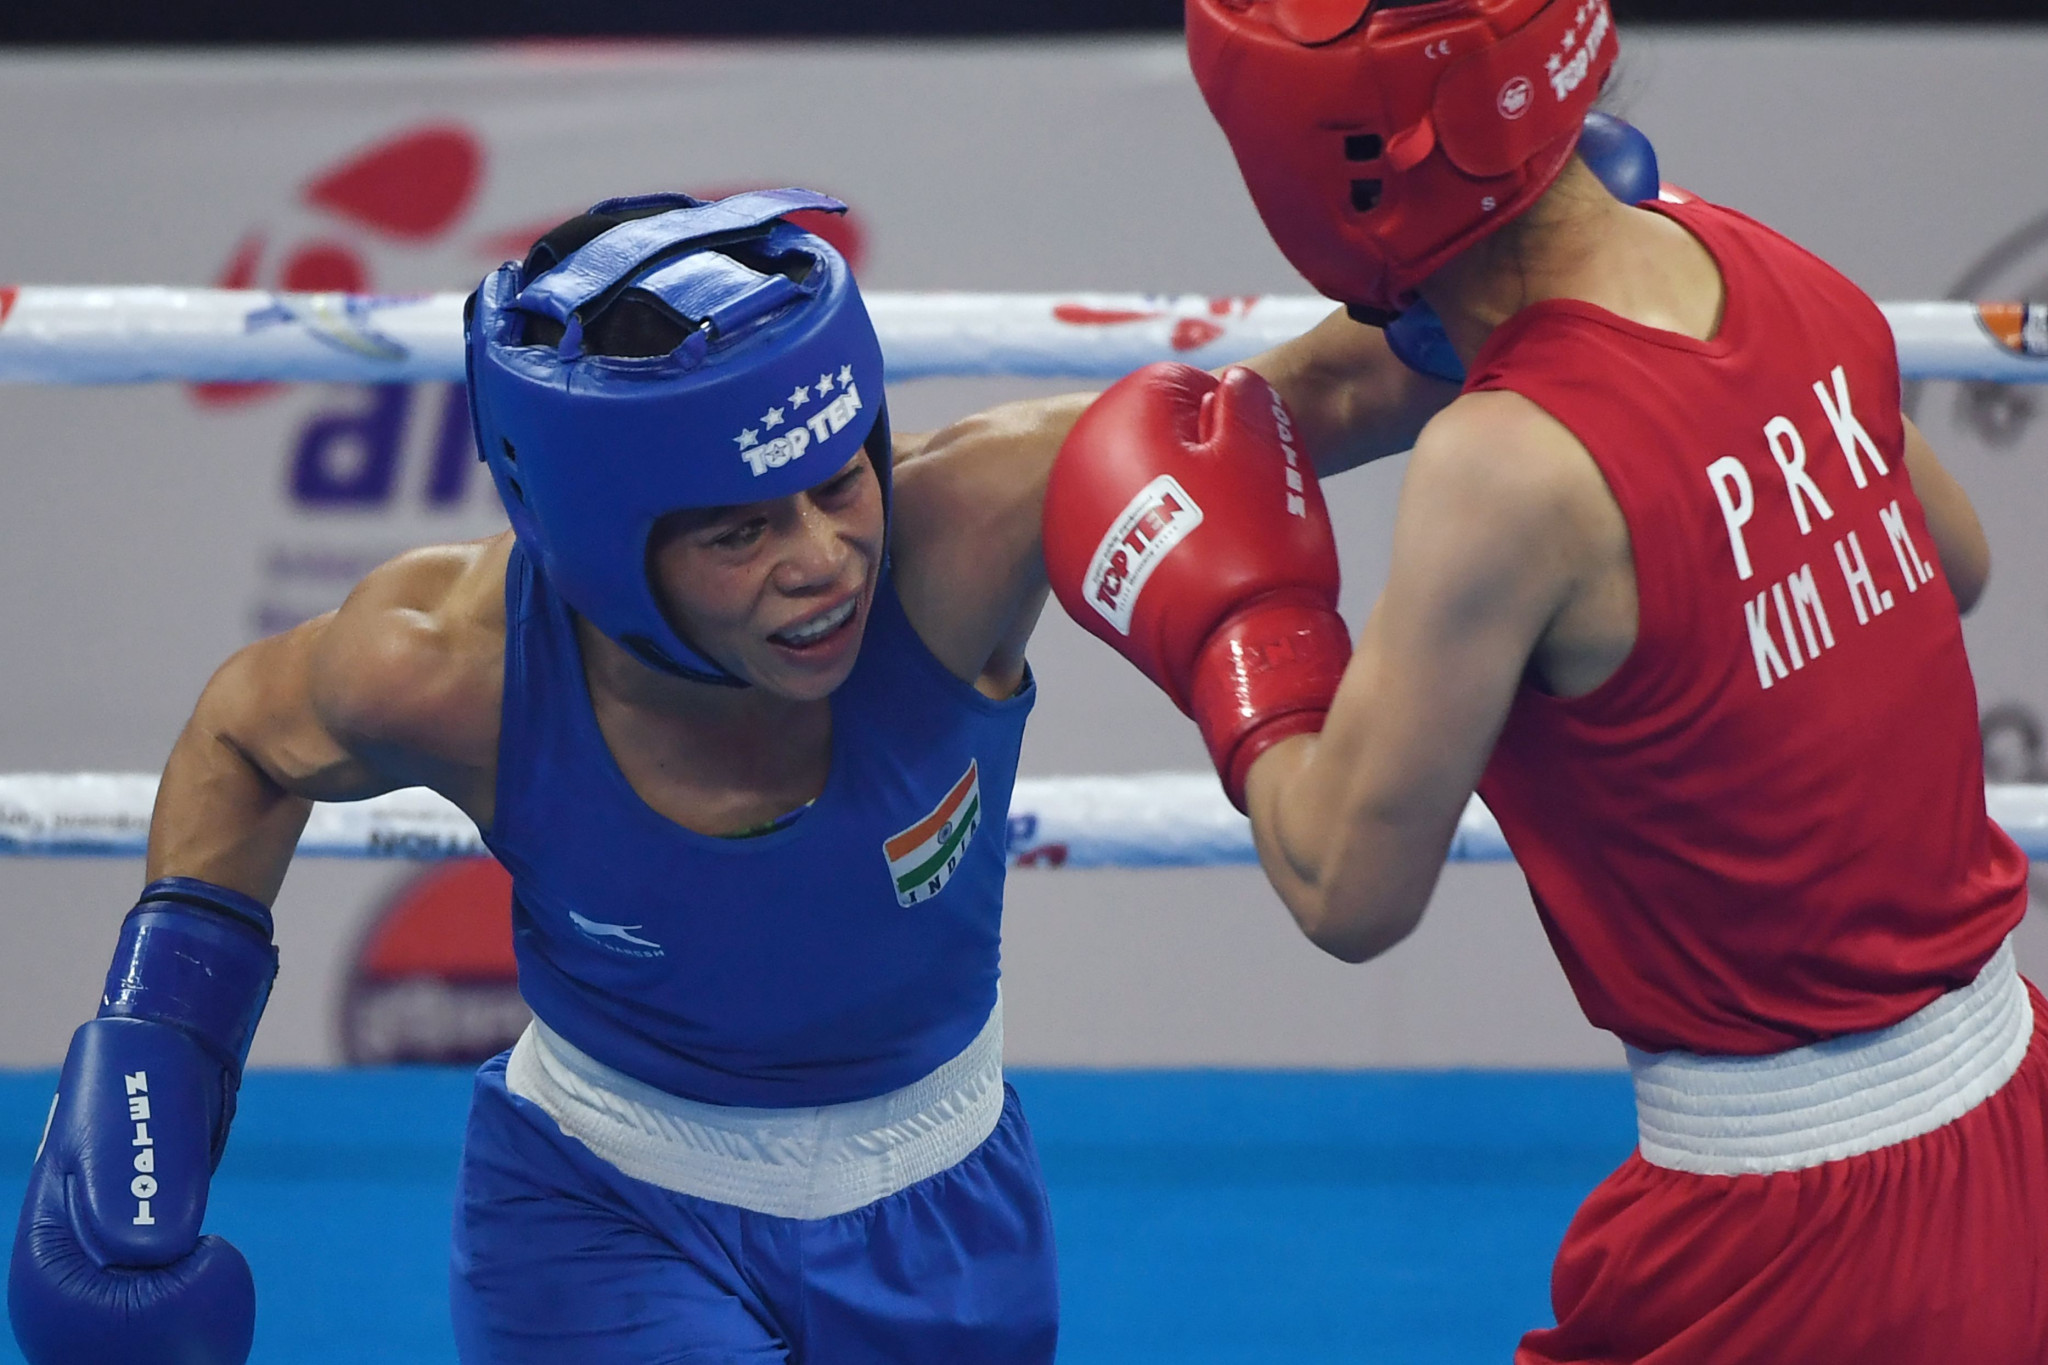 India to hold trials to choose team for Tokyo 2020 Olympic boxing qualifier